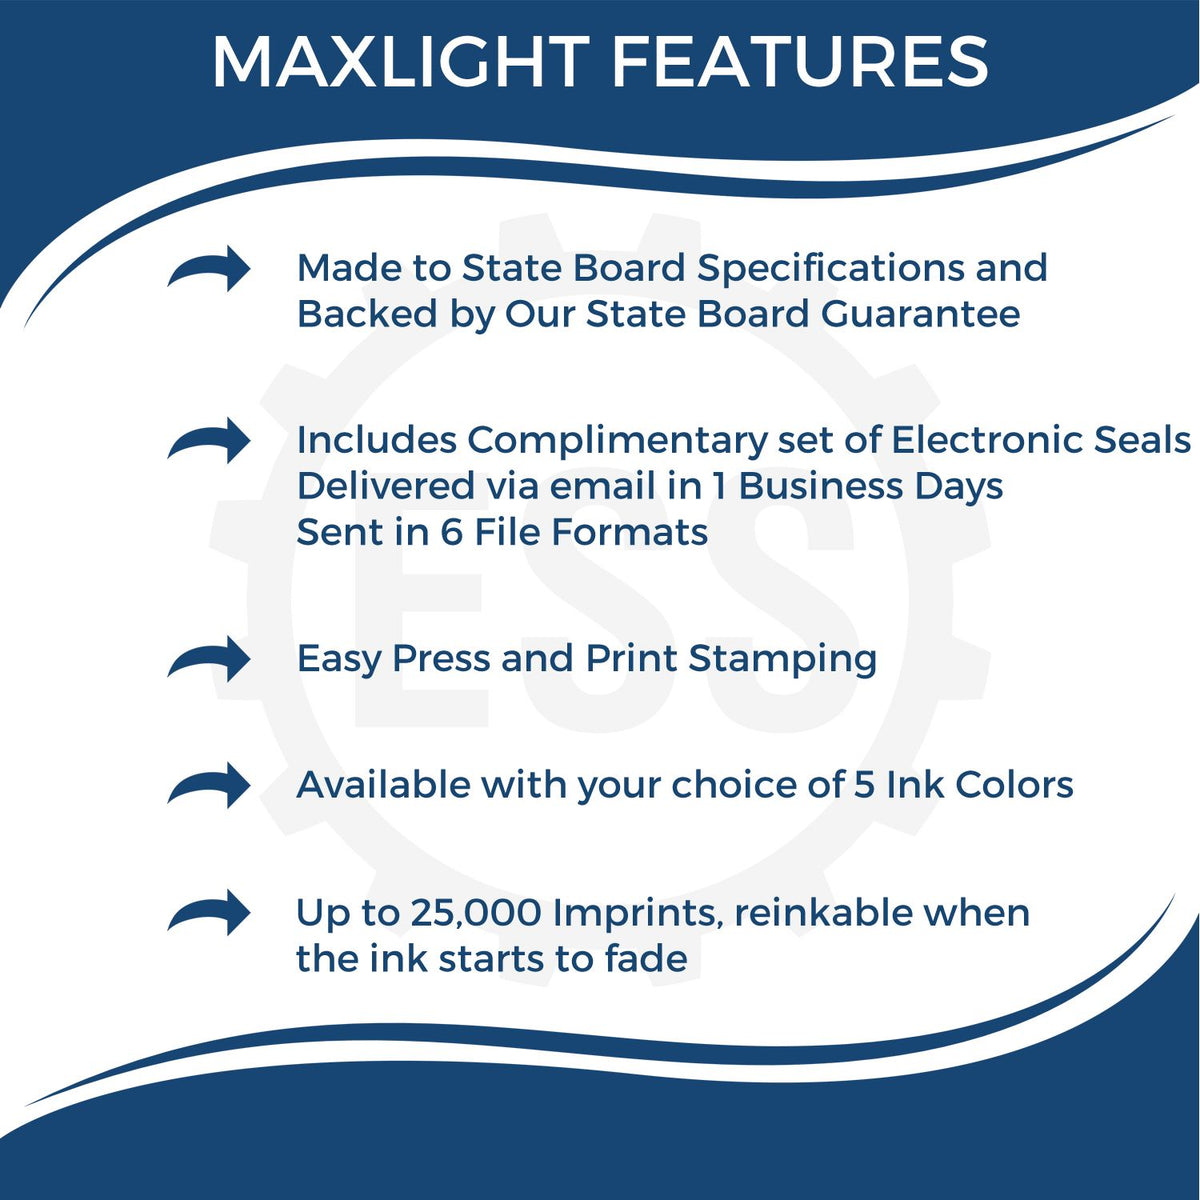 A picture of an infographic highlighting the selling points for the MaxLight Premium Pre-Inked Utah State Seal Notarial Stamp